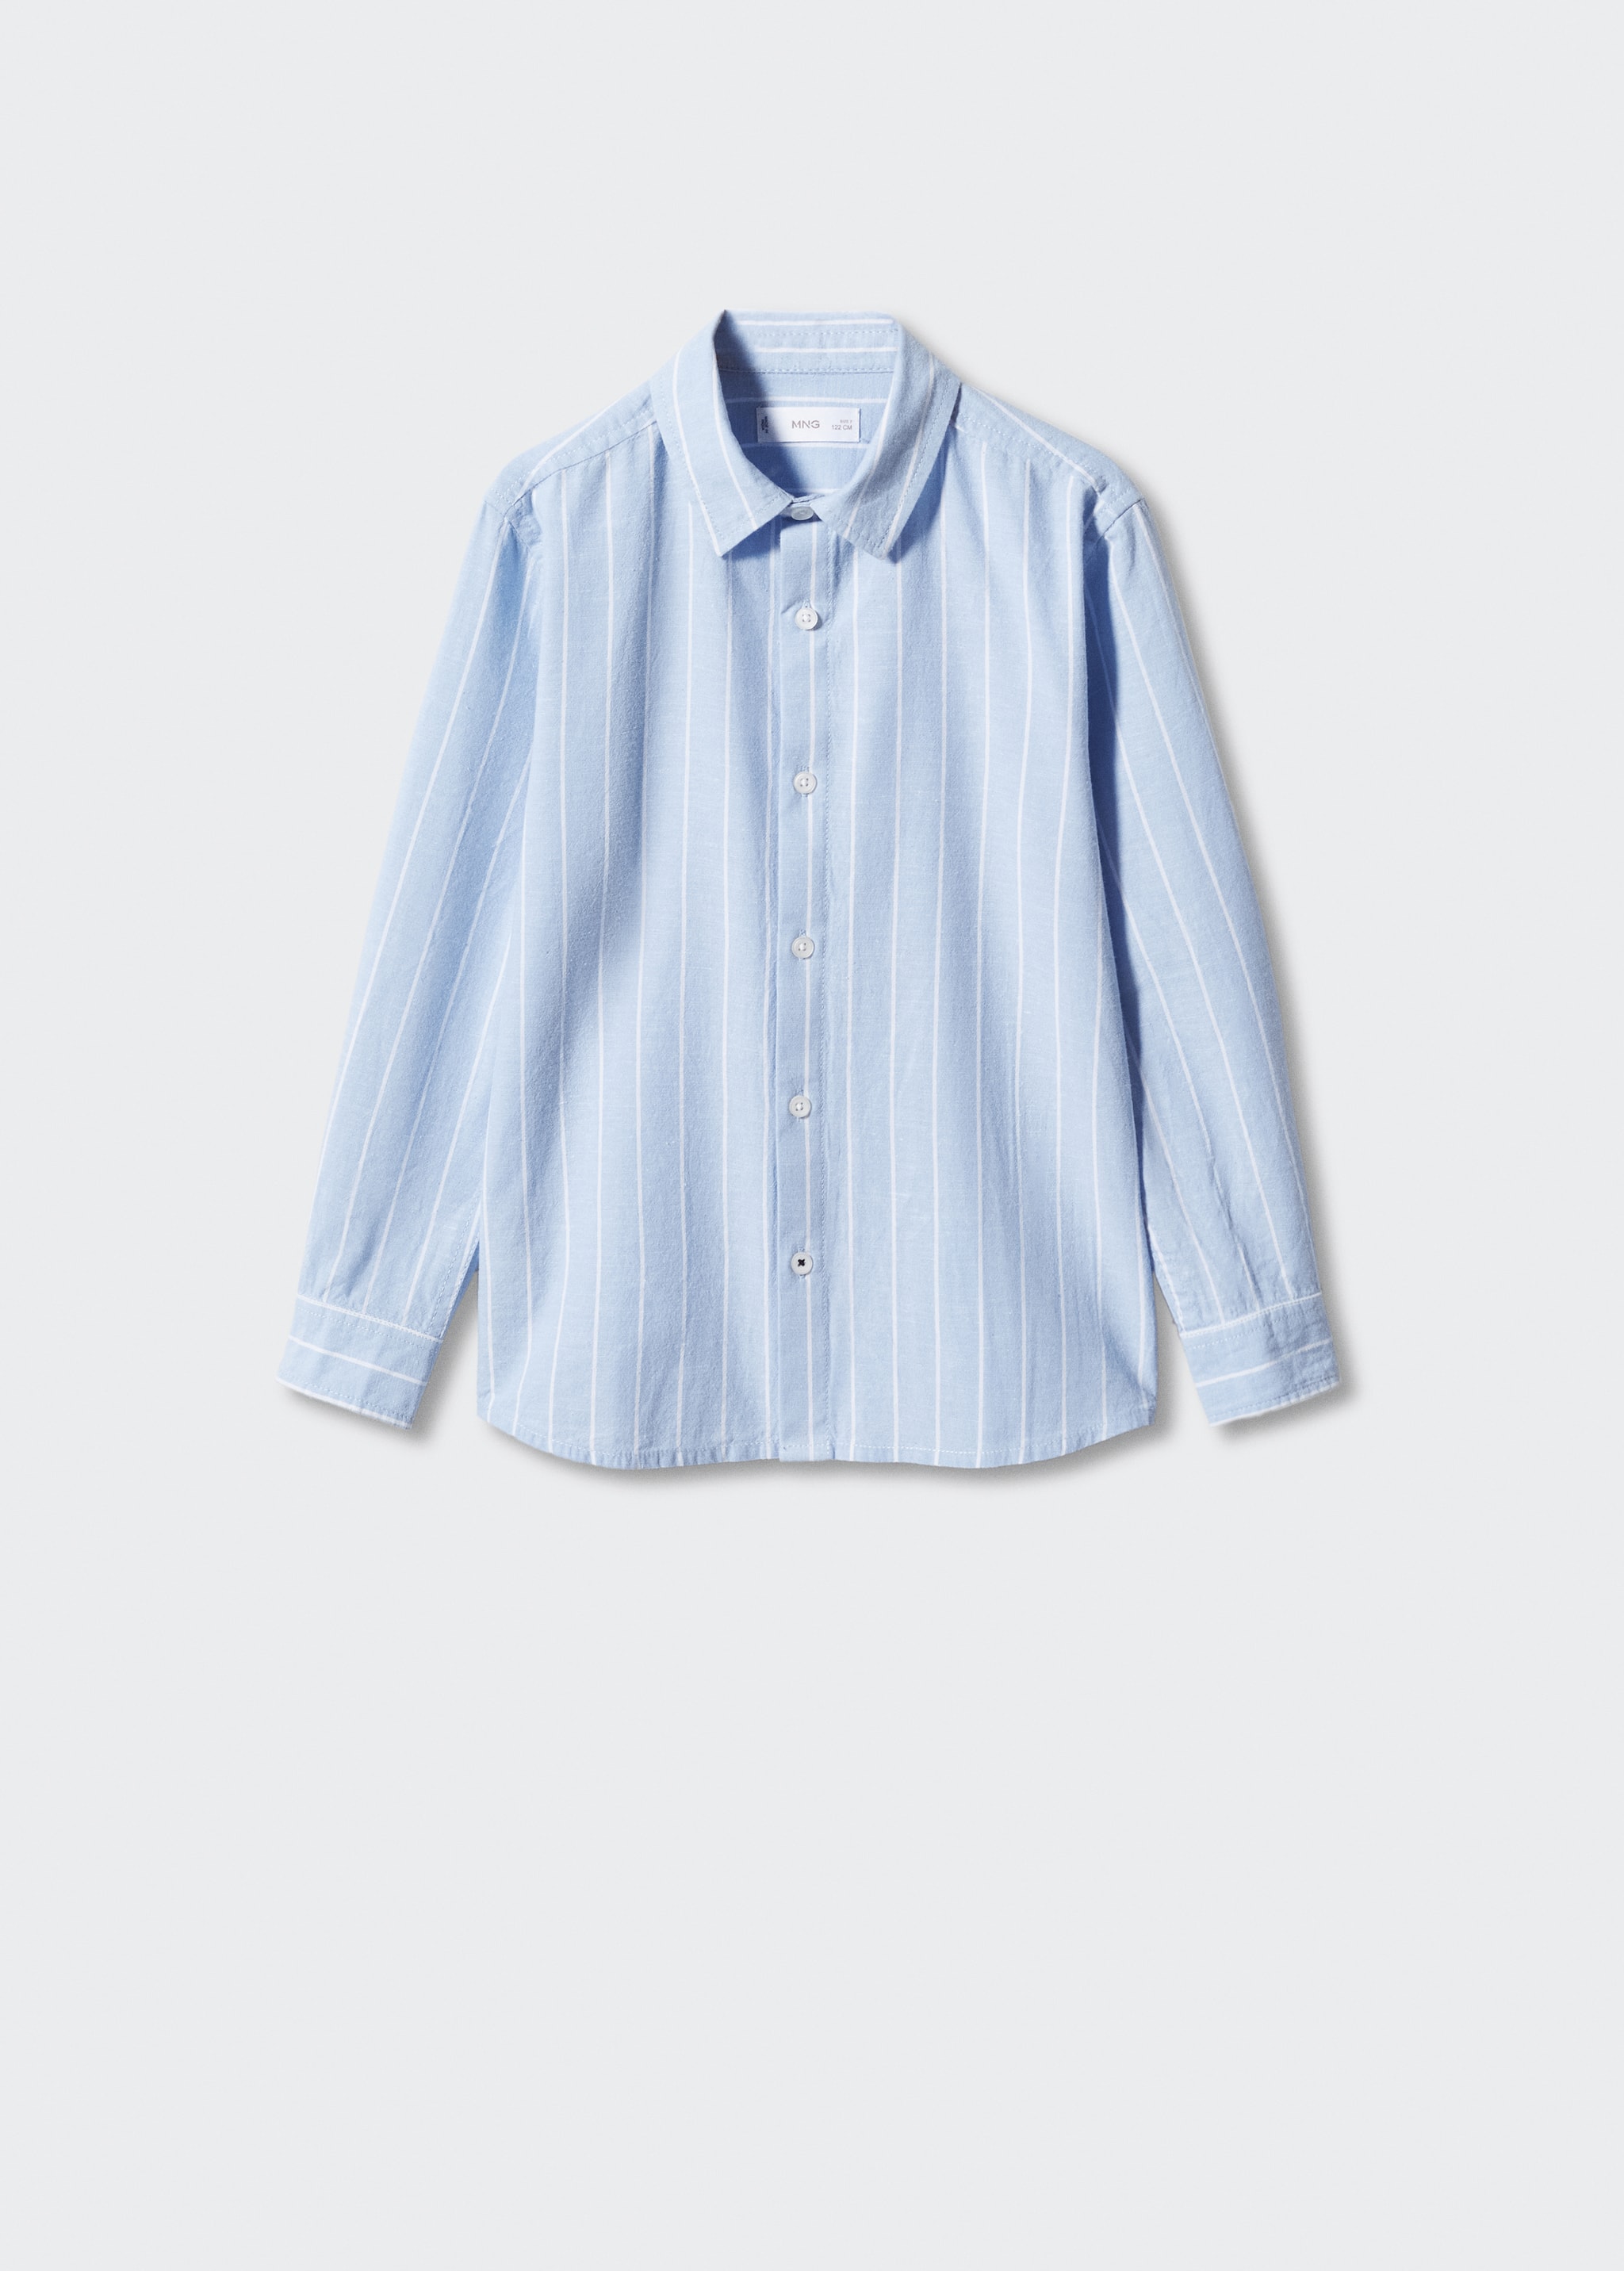 Striped cotton linen shirt - Article without model